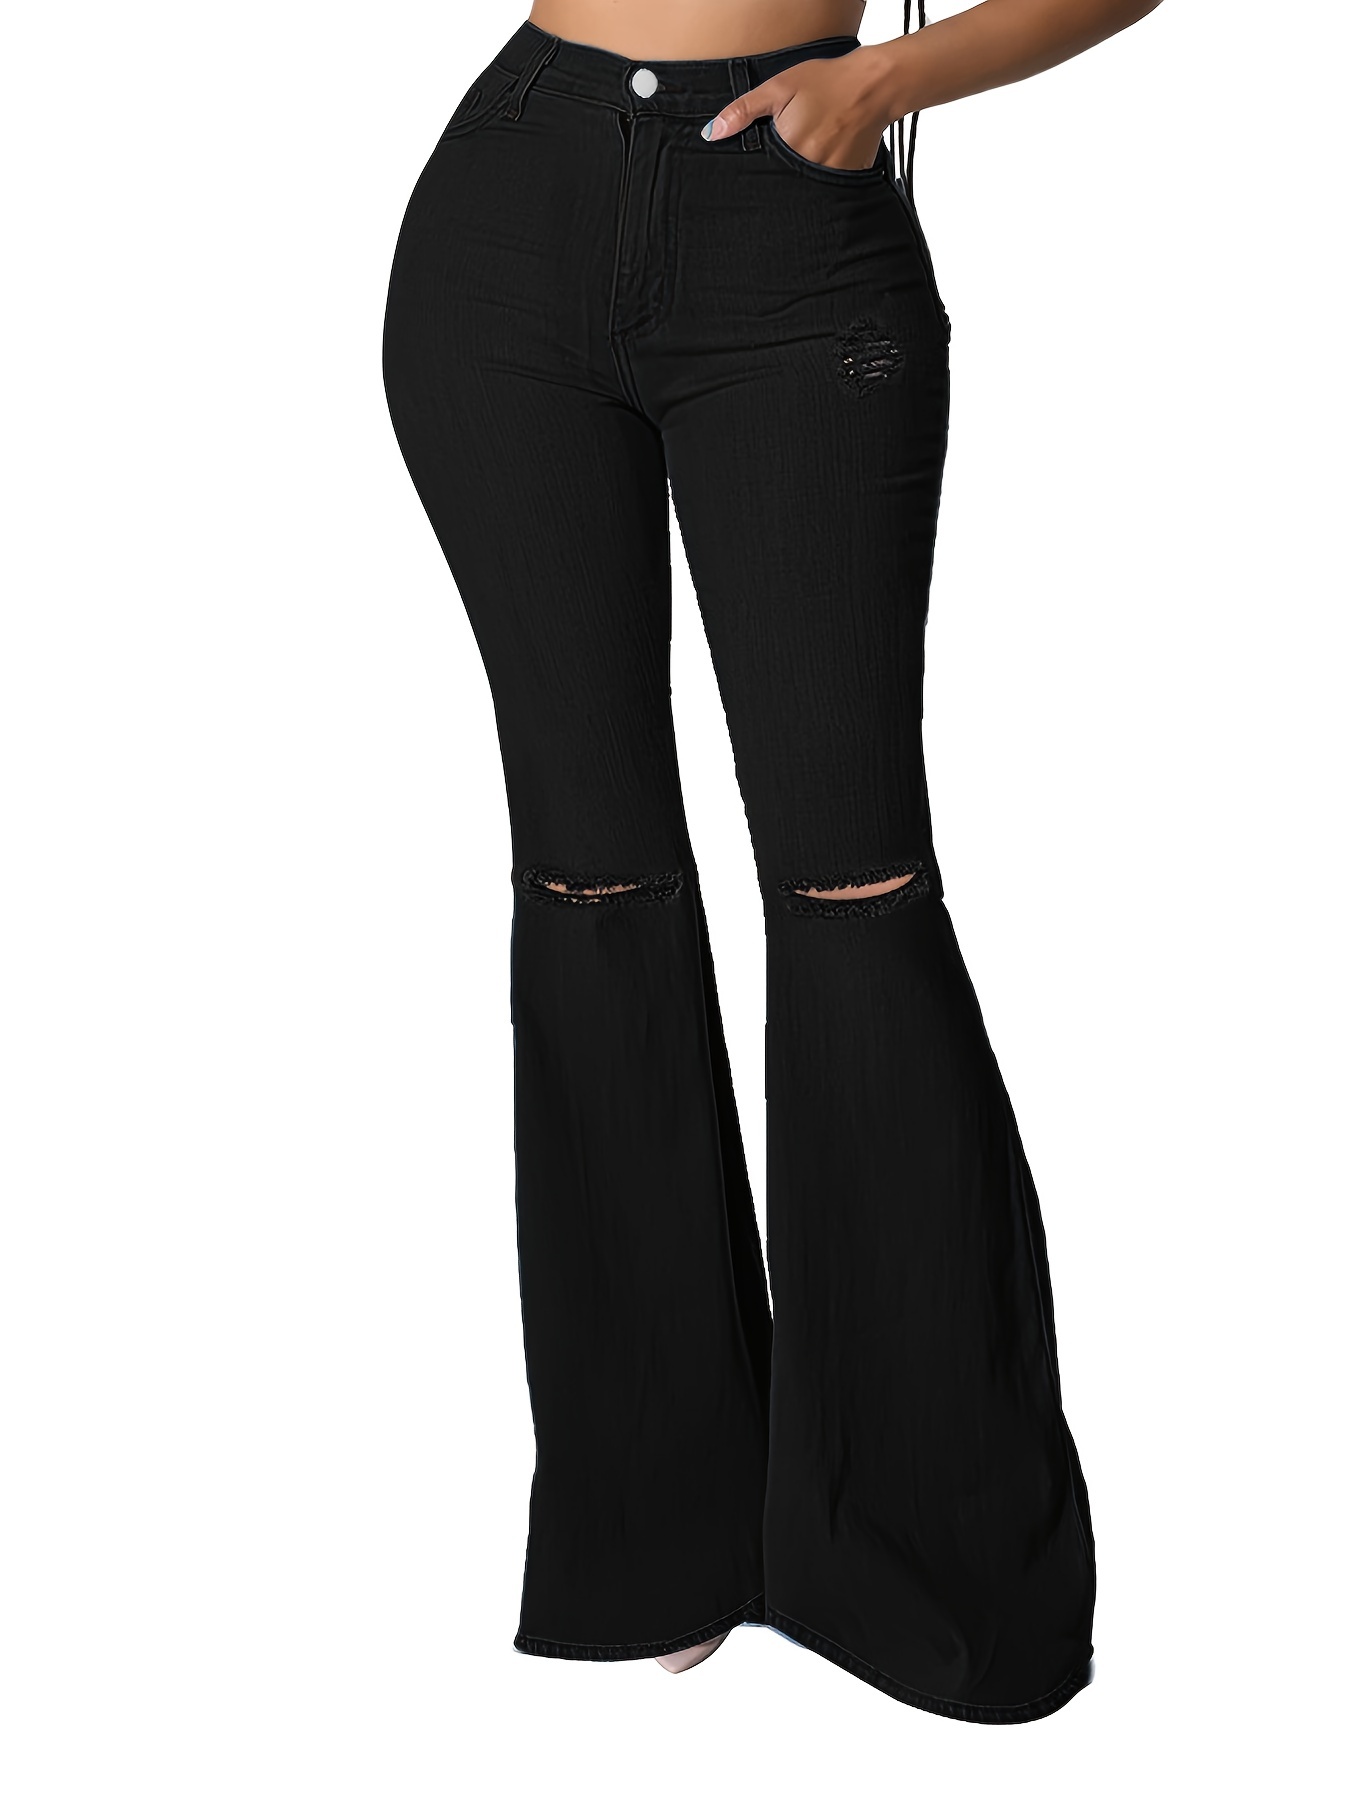 Black Ripped Flared Jeans, High Waist Distressed Bell Bottom Distressed  High * Denim Pants, Women's Denim Jeans & Clothing